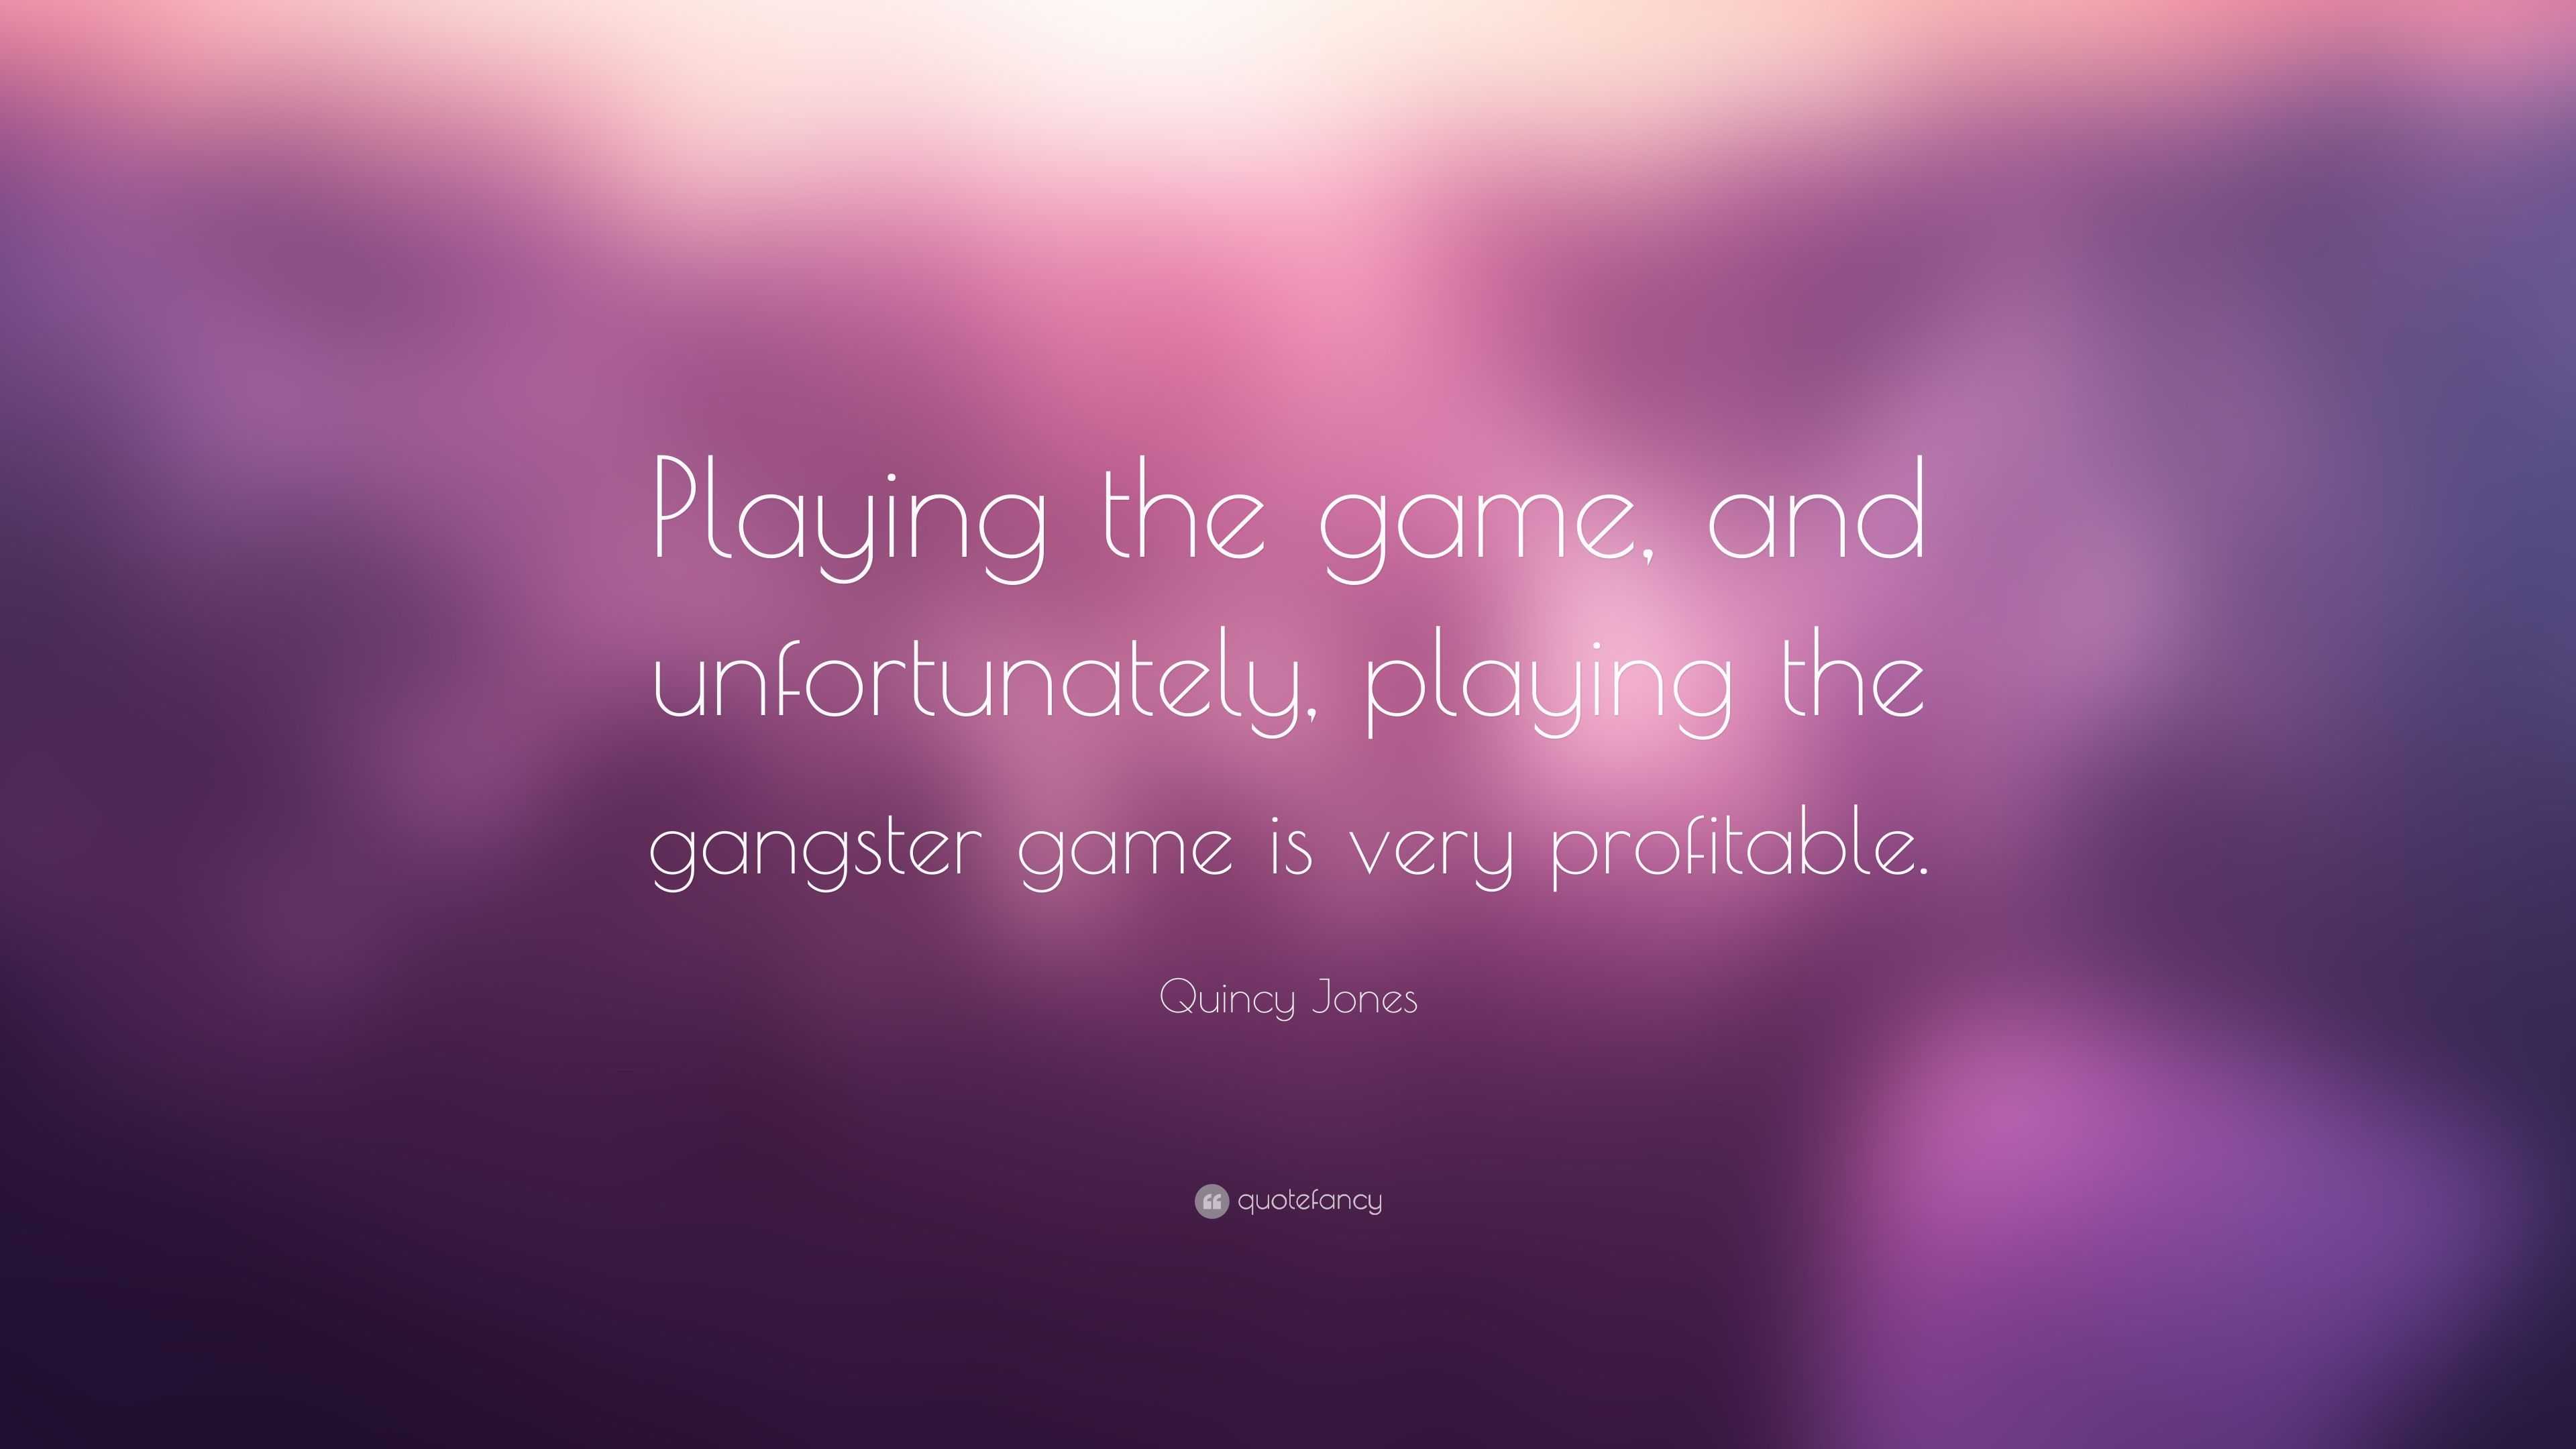 Life Is A Game Quotes. QuotesGram  Game quotes, Gamer quotes, Gambling  quotes